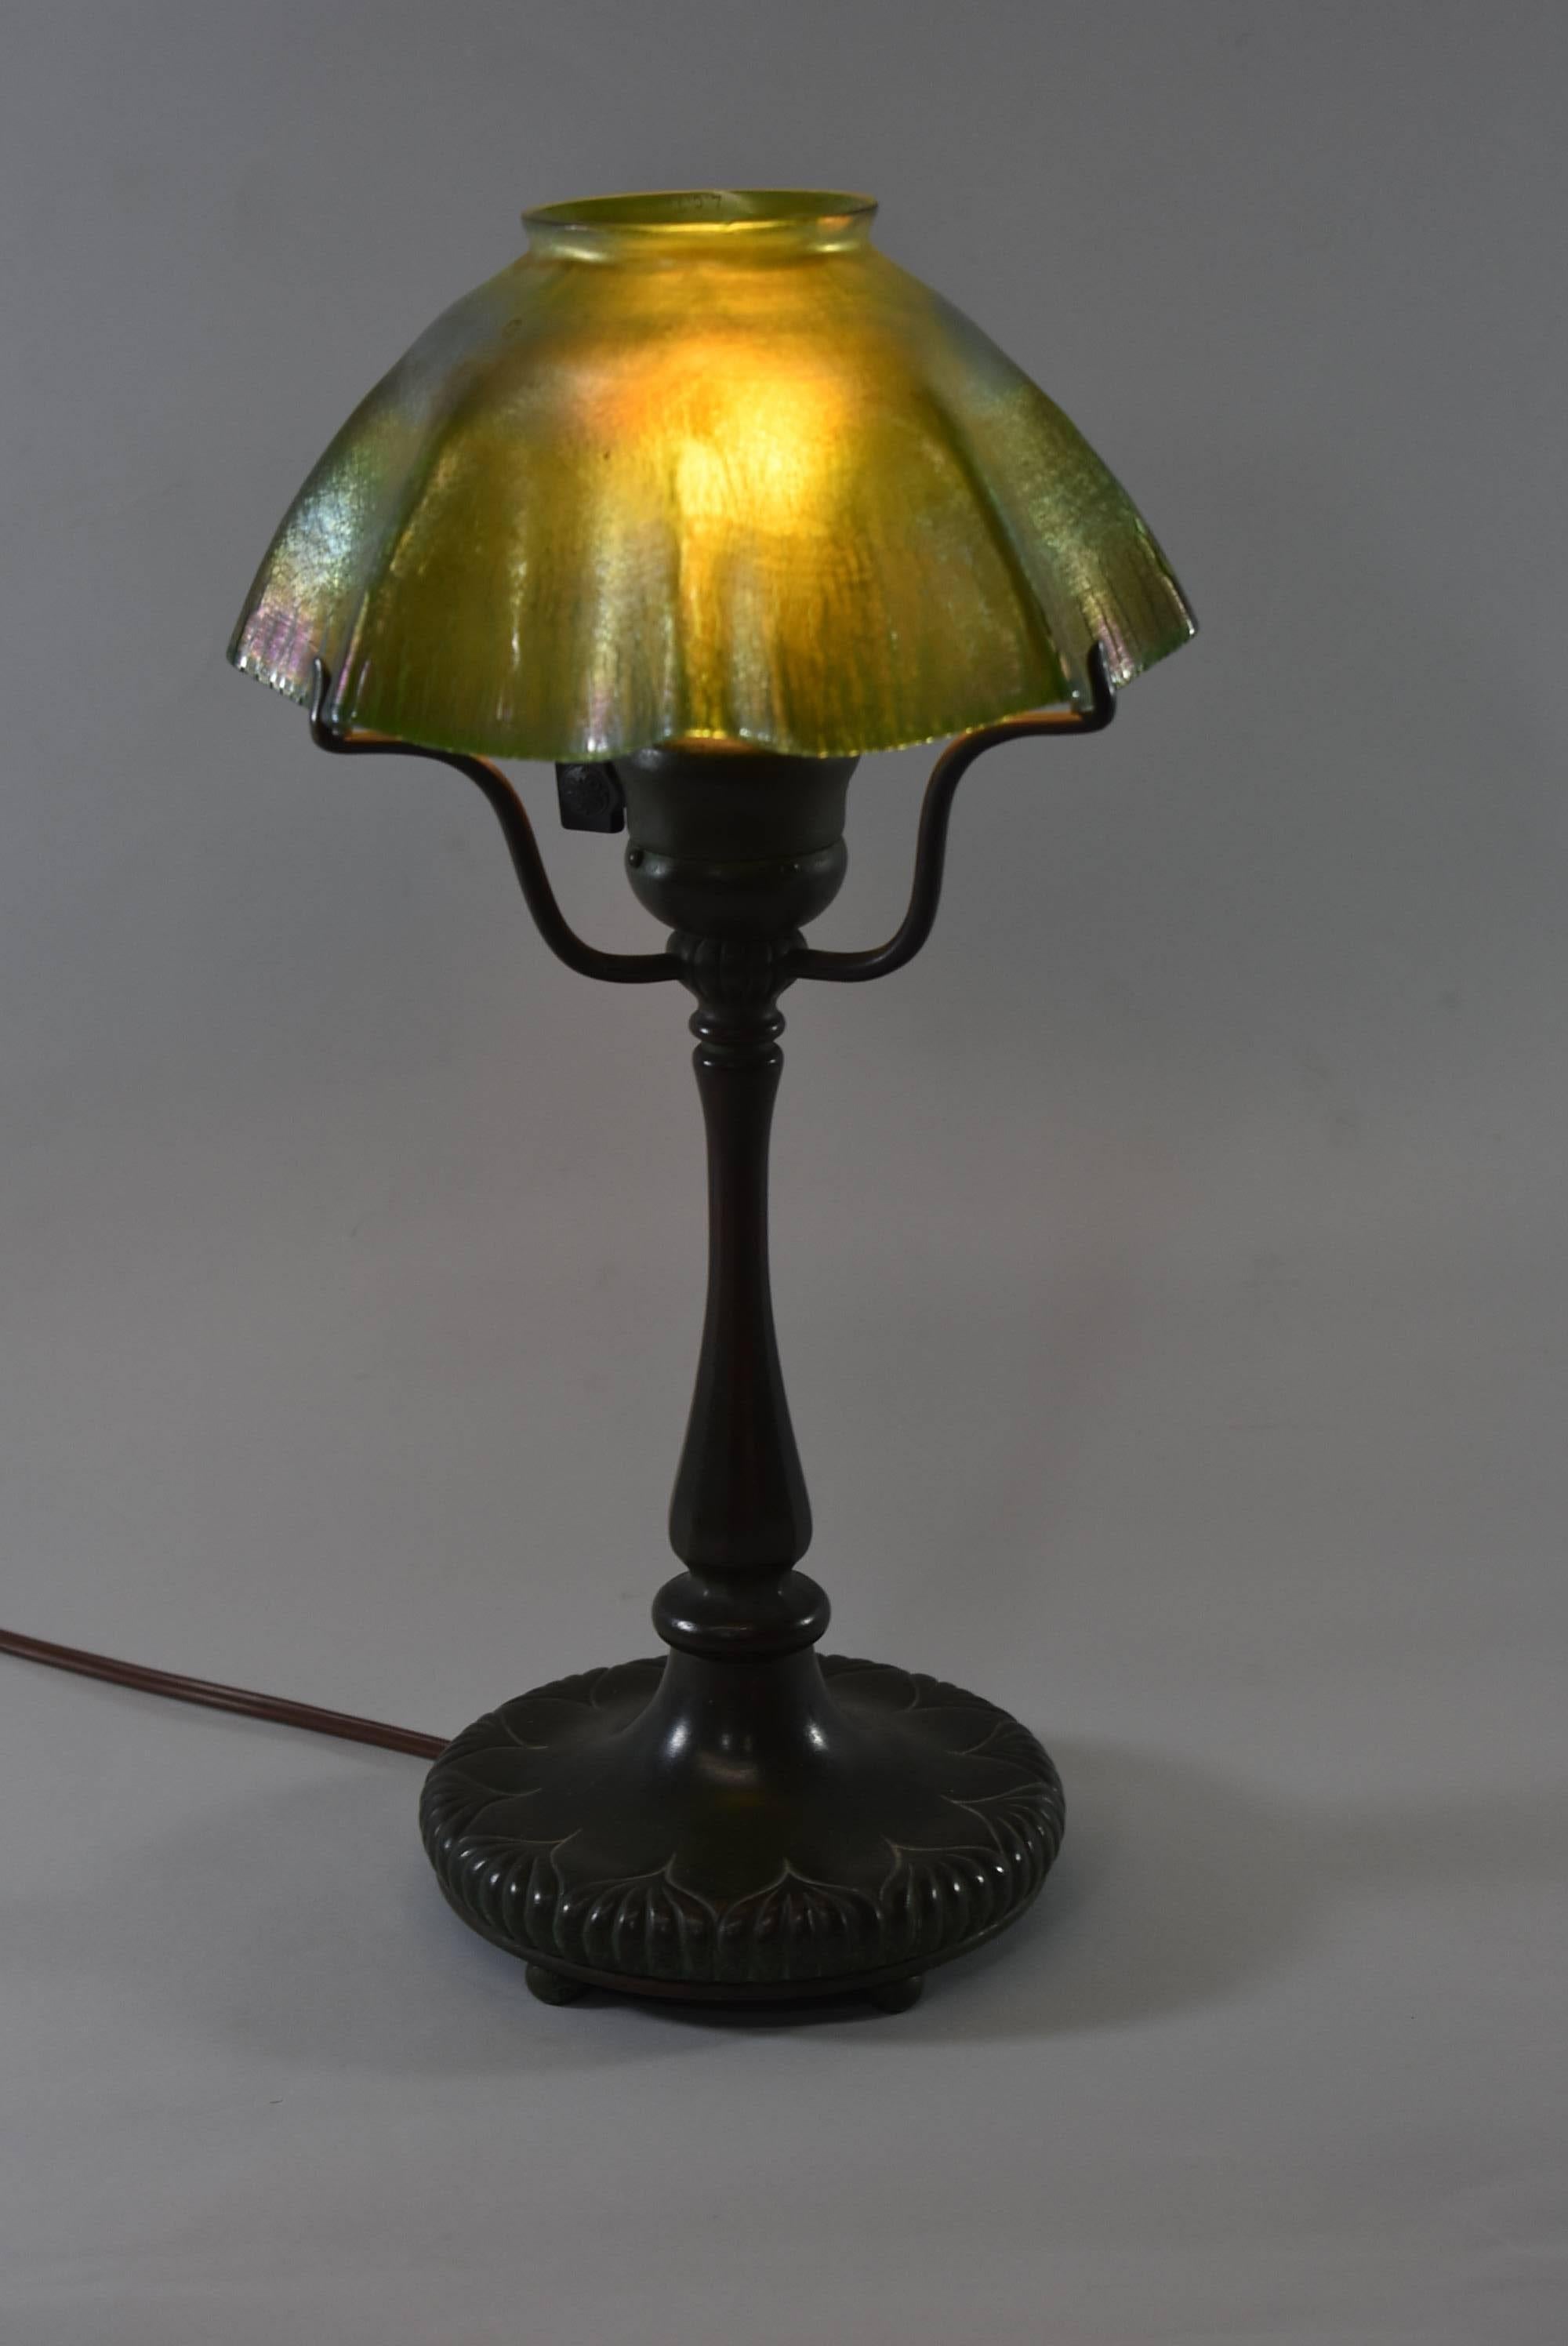 A stunning Tiffany glass table lamp. The bronze base has it's original dark green patina, is signed Tiffany Studio, New York #322. It has a three-arm spider support that holds the shade and an original G.E. socket. There is a beautiful green